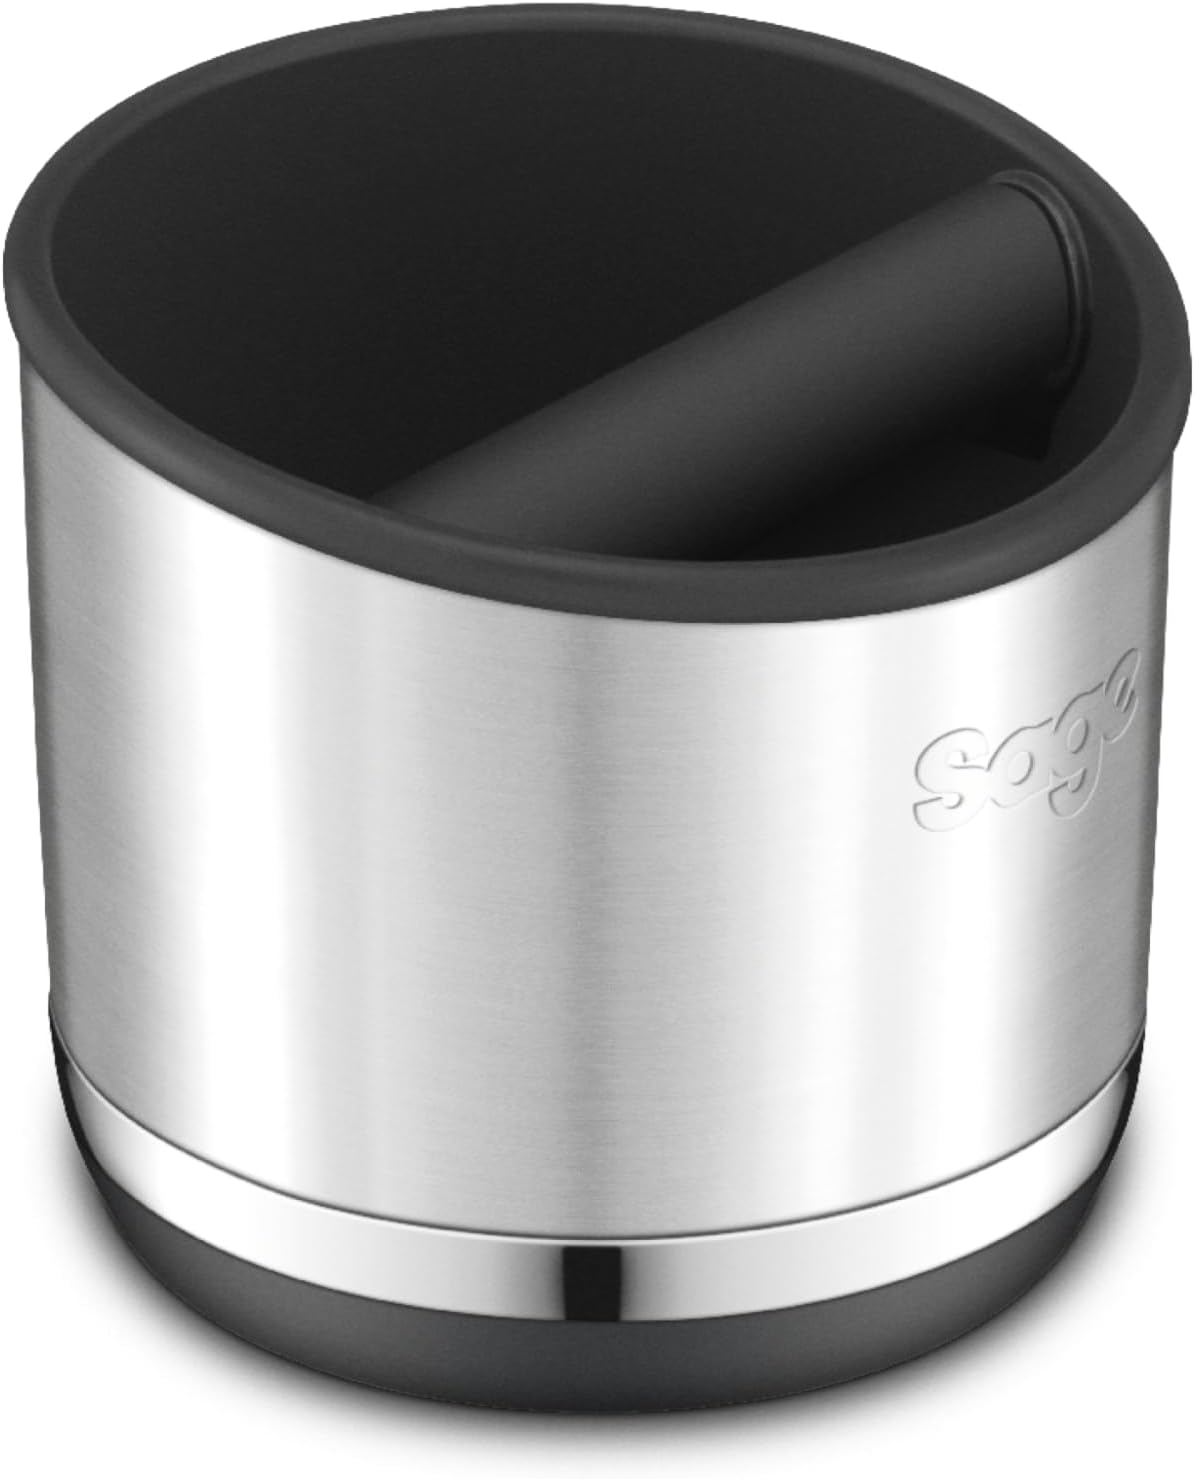 Sage The Knock Box 10 Brushed Stainless Steel | SEA501BSS0ZEU1